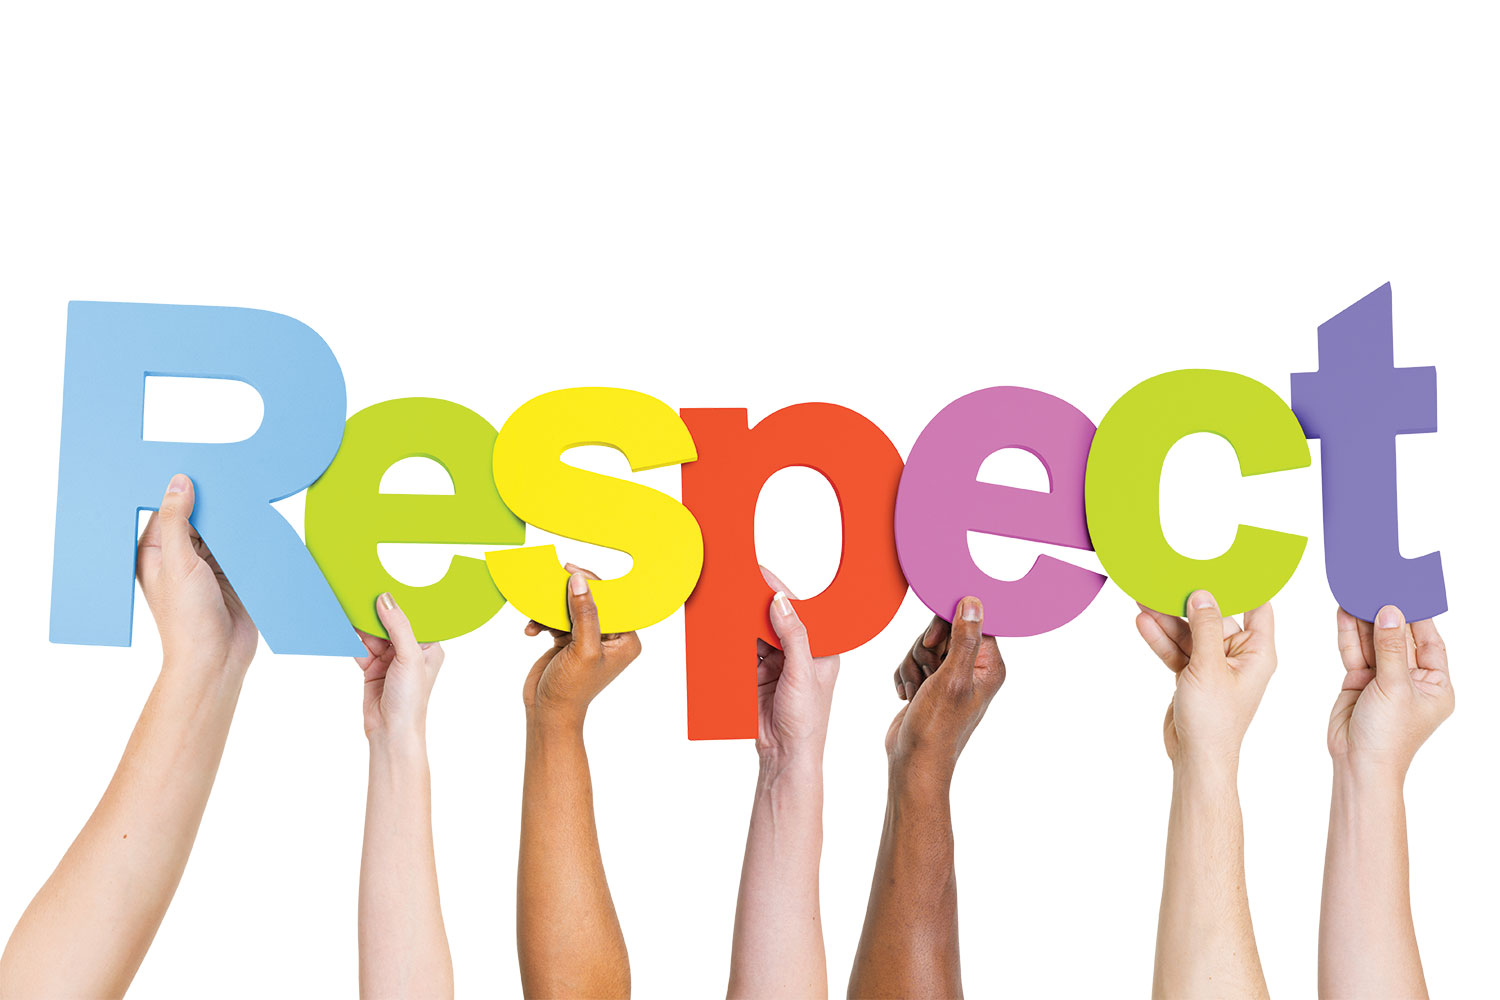 Diverse arms and hands holding up the differently coloured letters spelling out ‘Respect’.